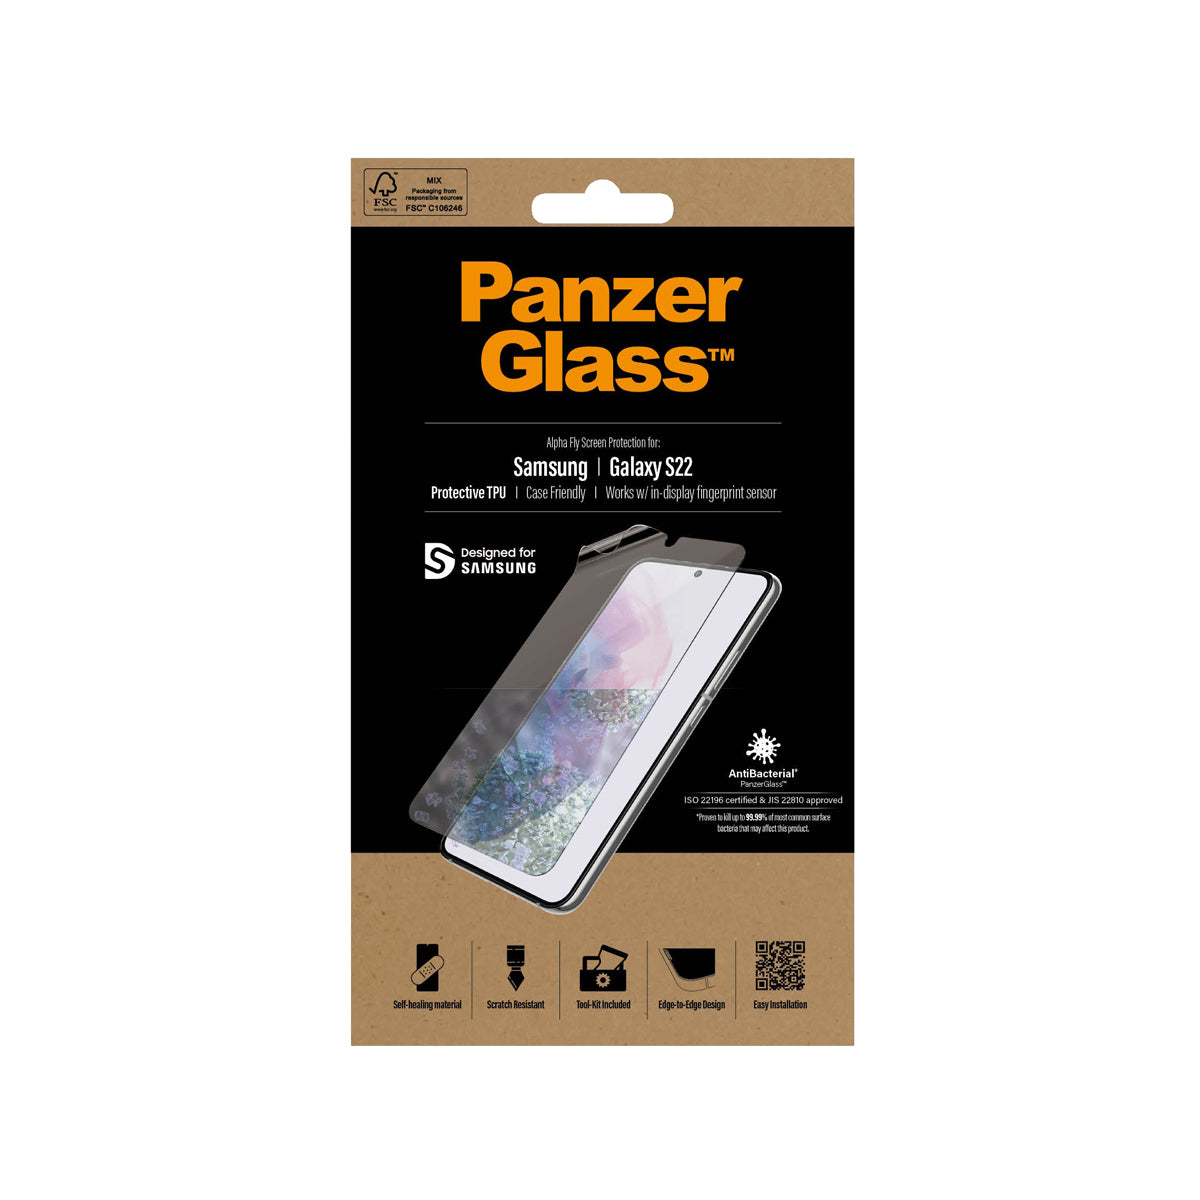 PanzerGlass TPU Antibacterial Phone Screen Pprotector for Samsung GS22 - Clear.